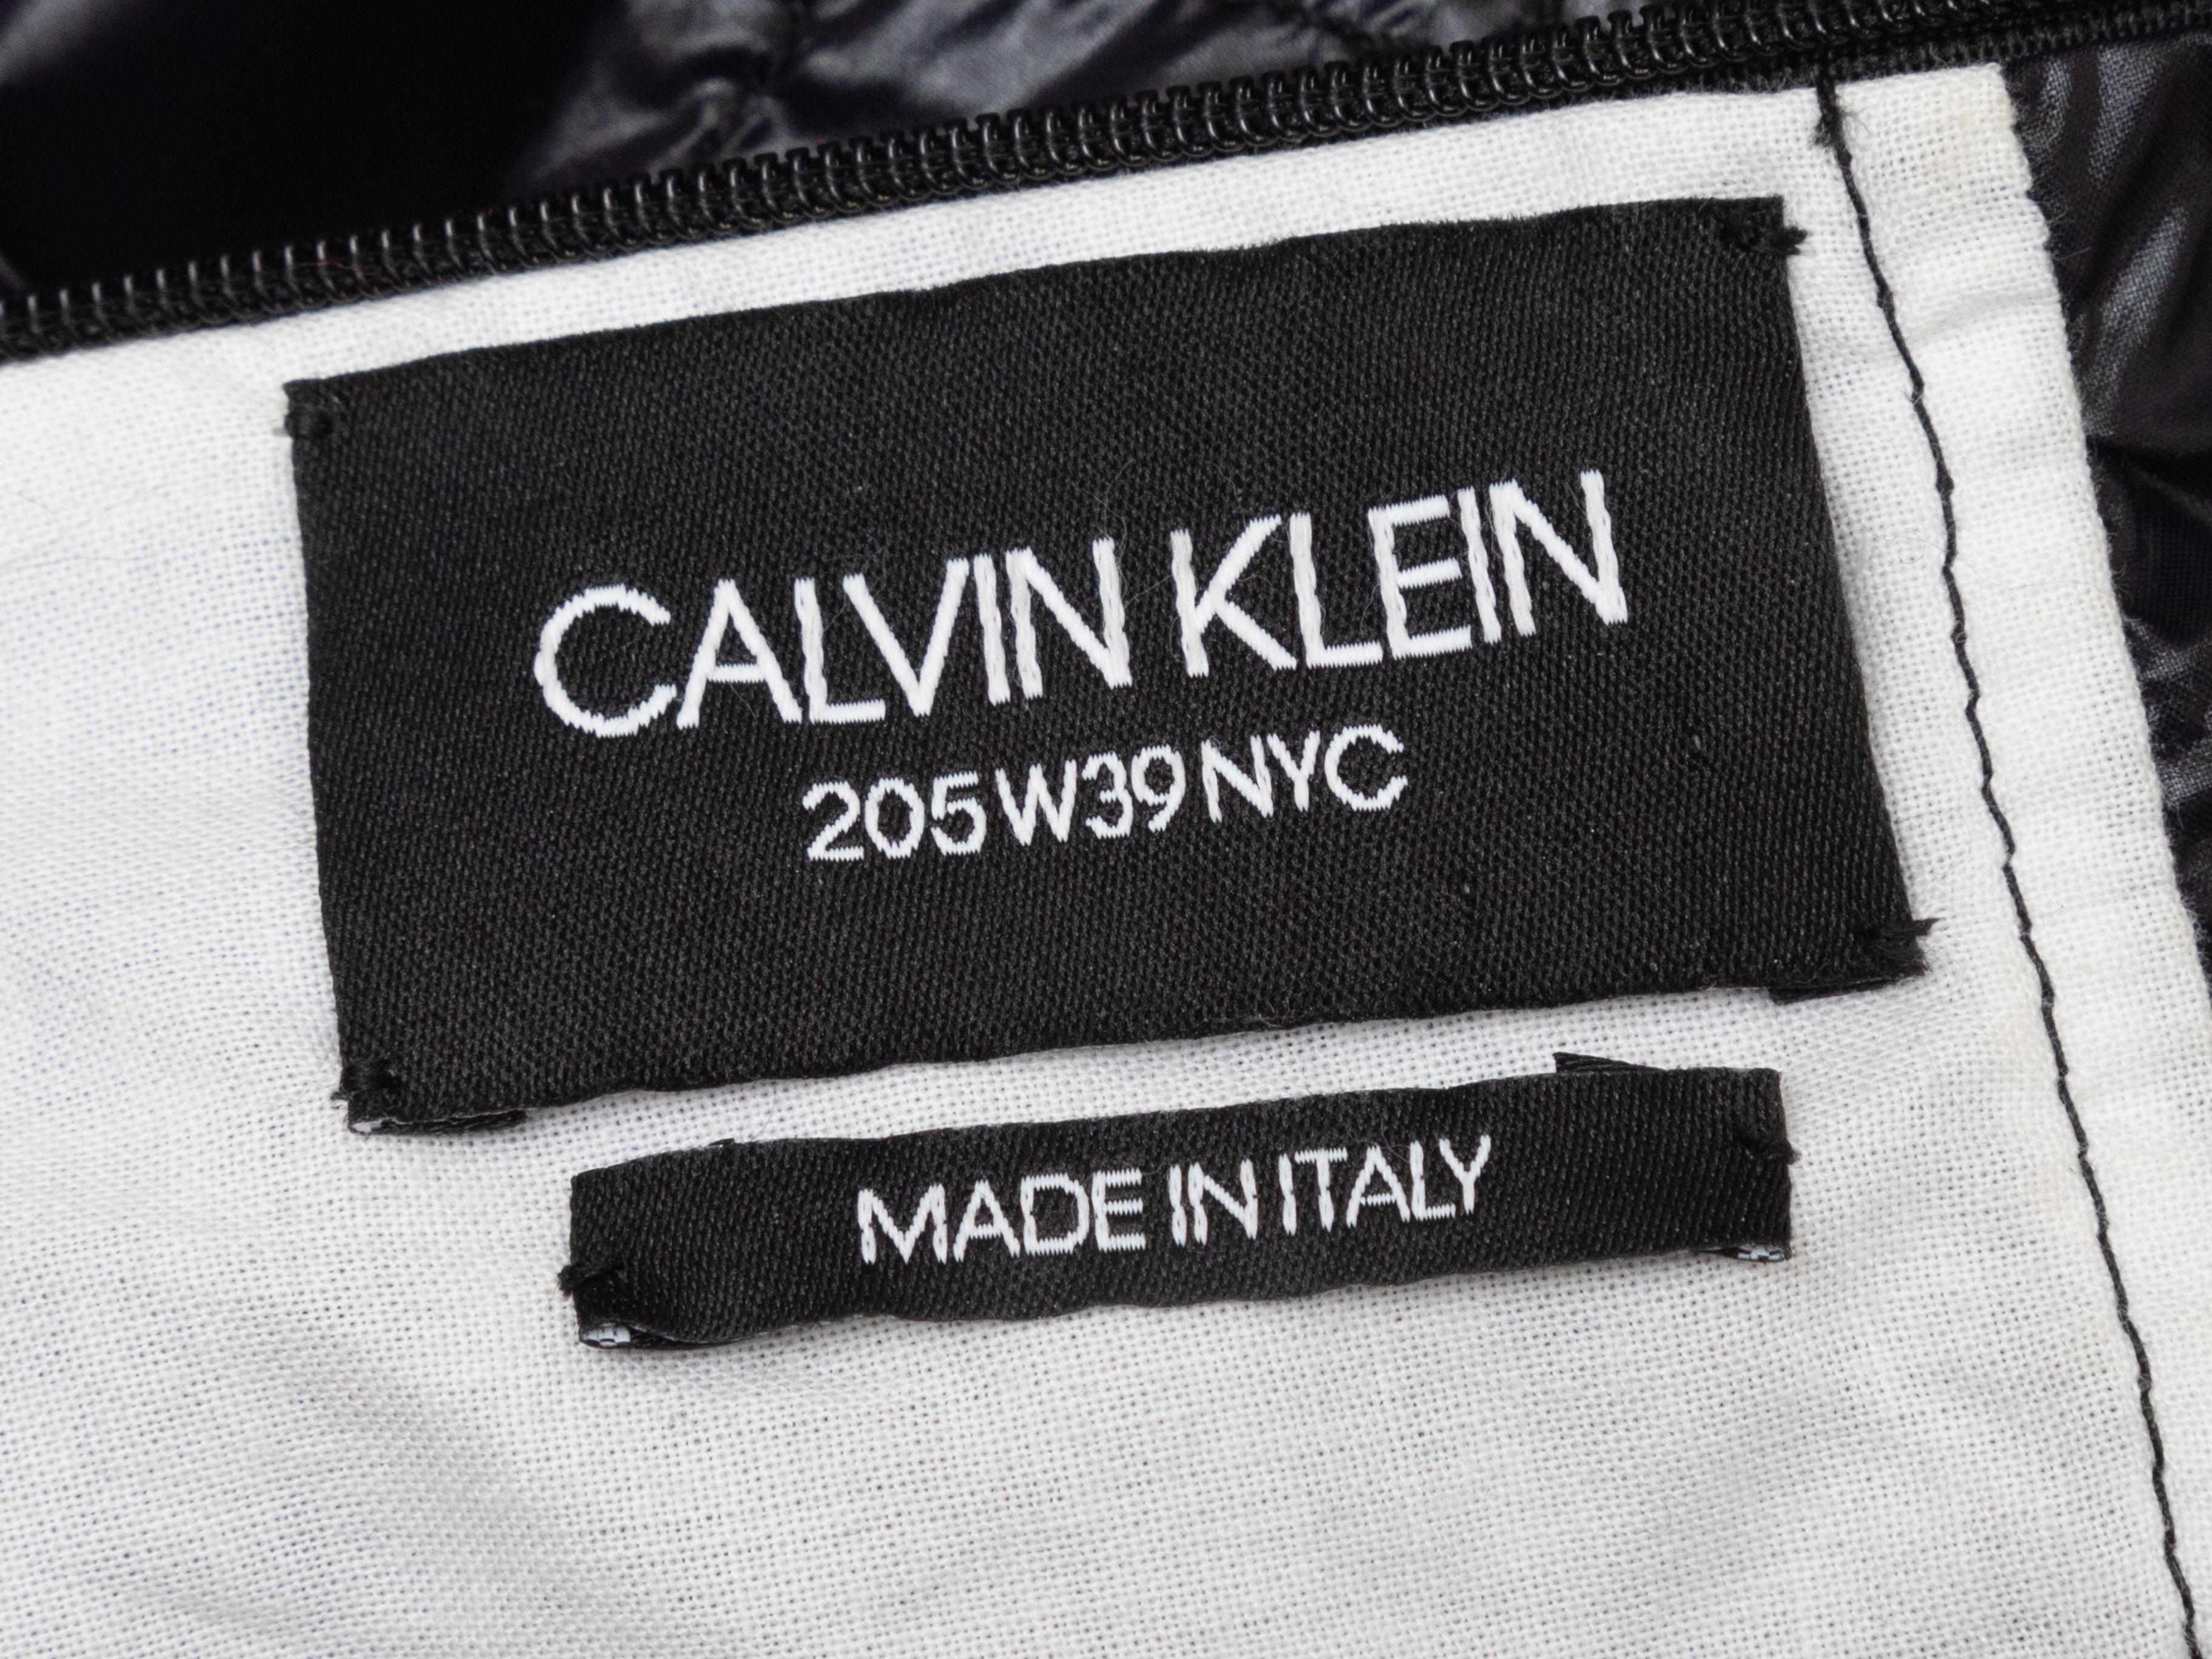 Product Details: Black nylon sleeveless mock neck top by Calvin Klein 205W39NYC. Drawstring tie closure at neck. 36